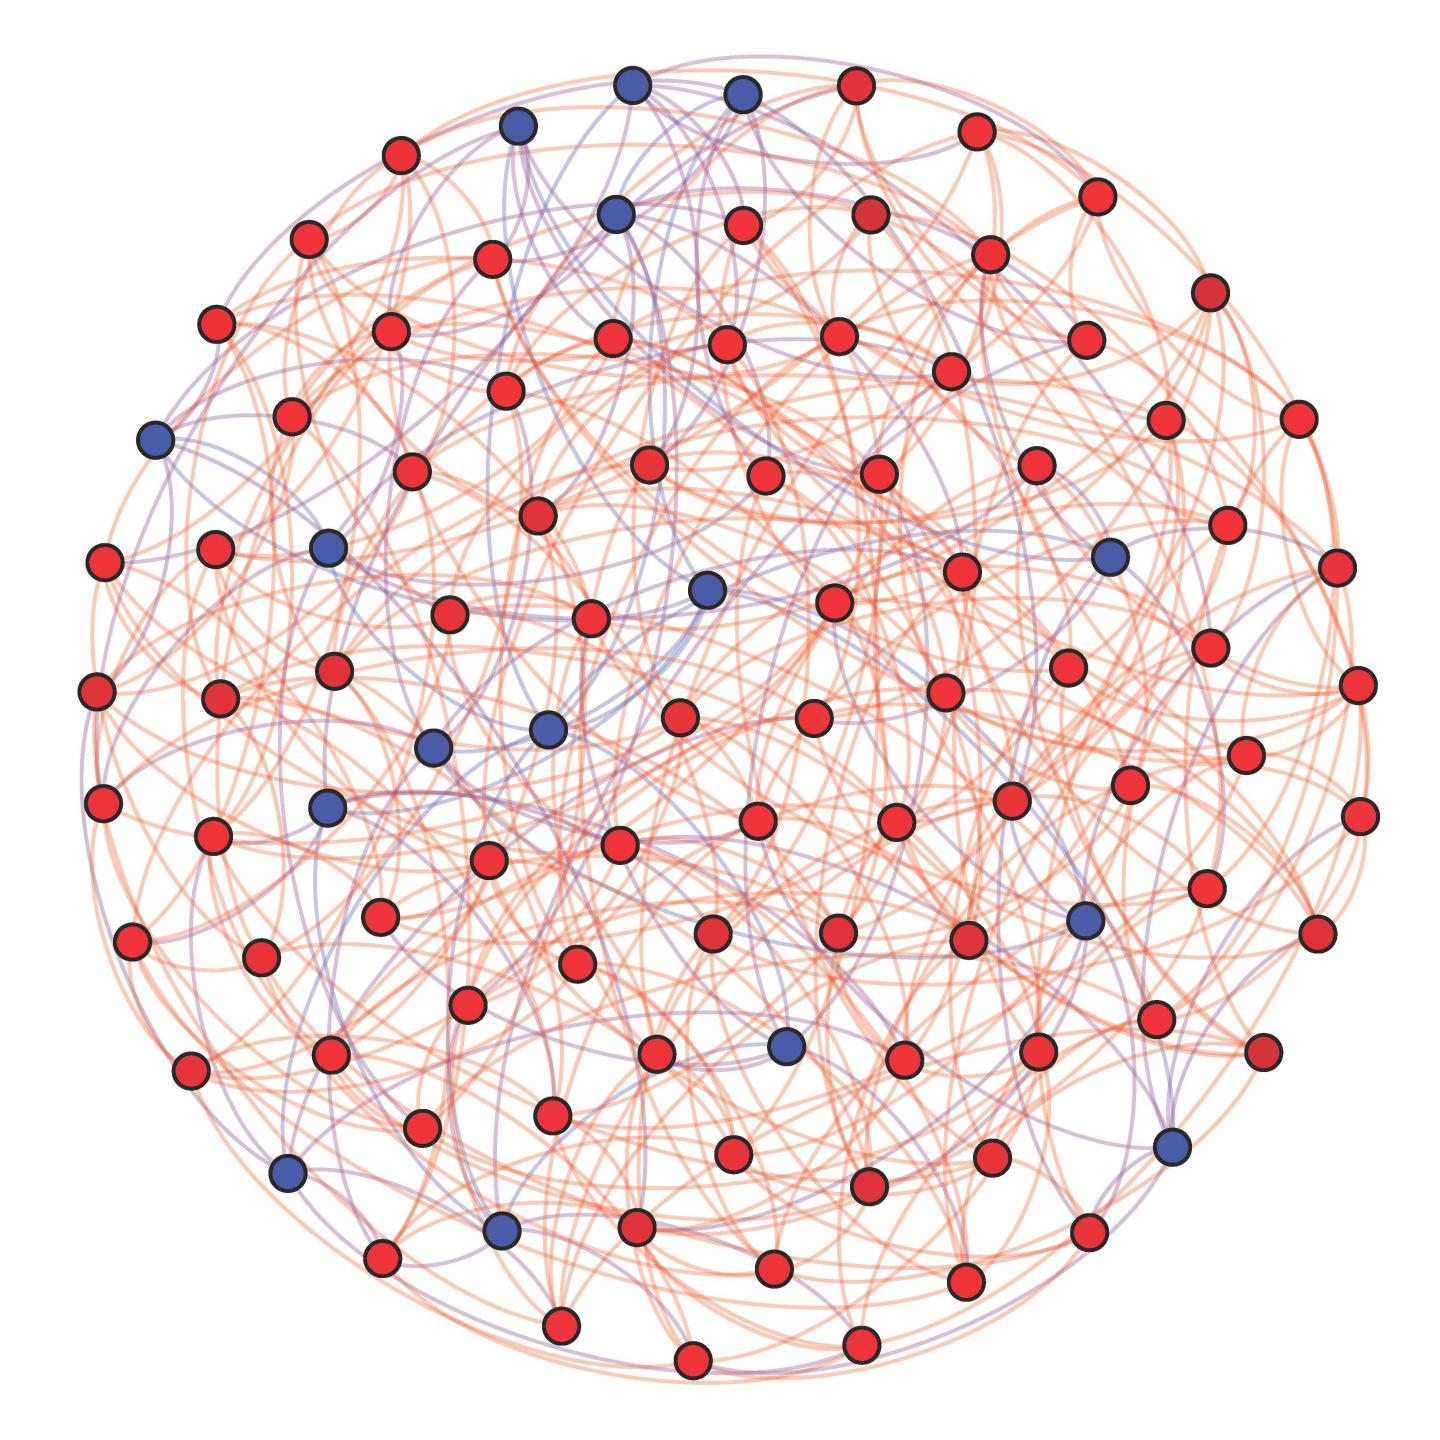 New Insights into the Evolution of Cooperation in Spatially Structured  Populations